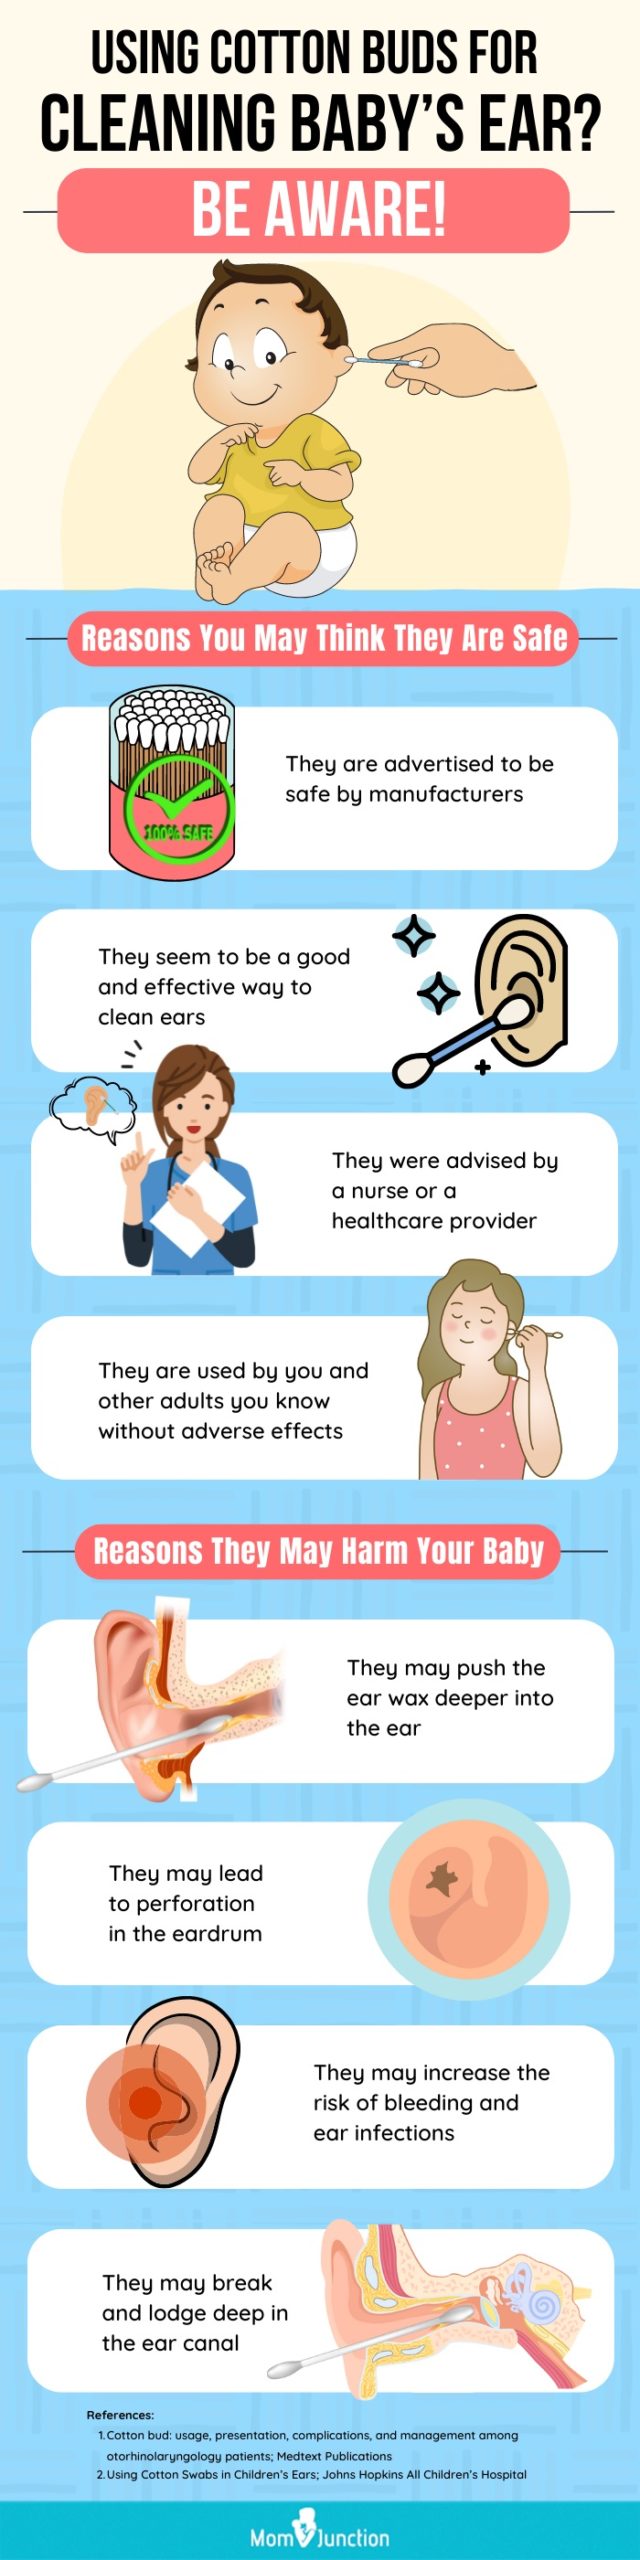 consequences of using cotton buds to clear baby’s ear [infographic]